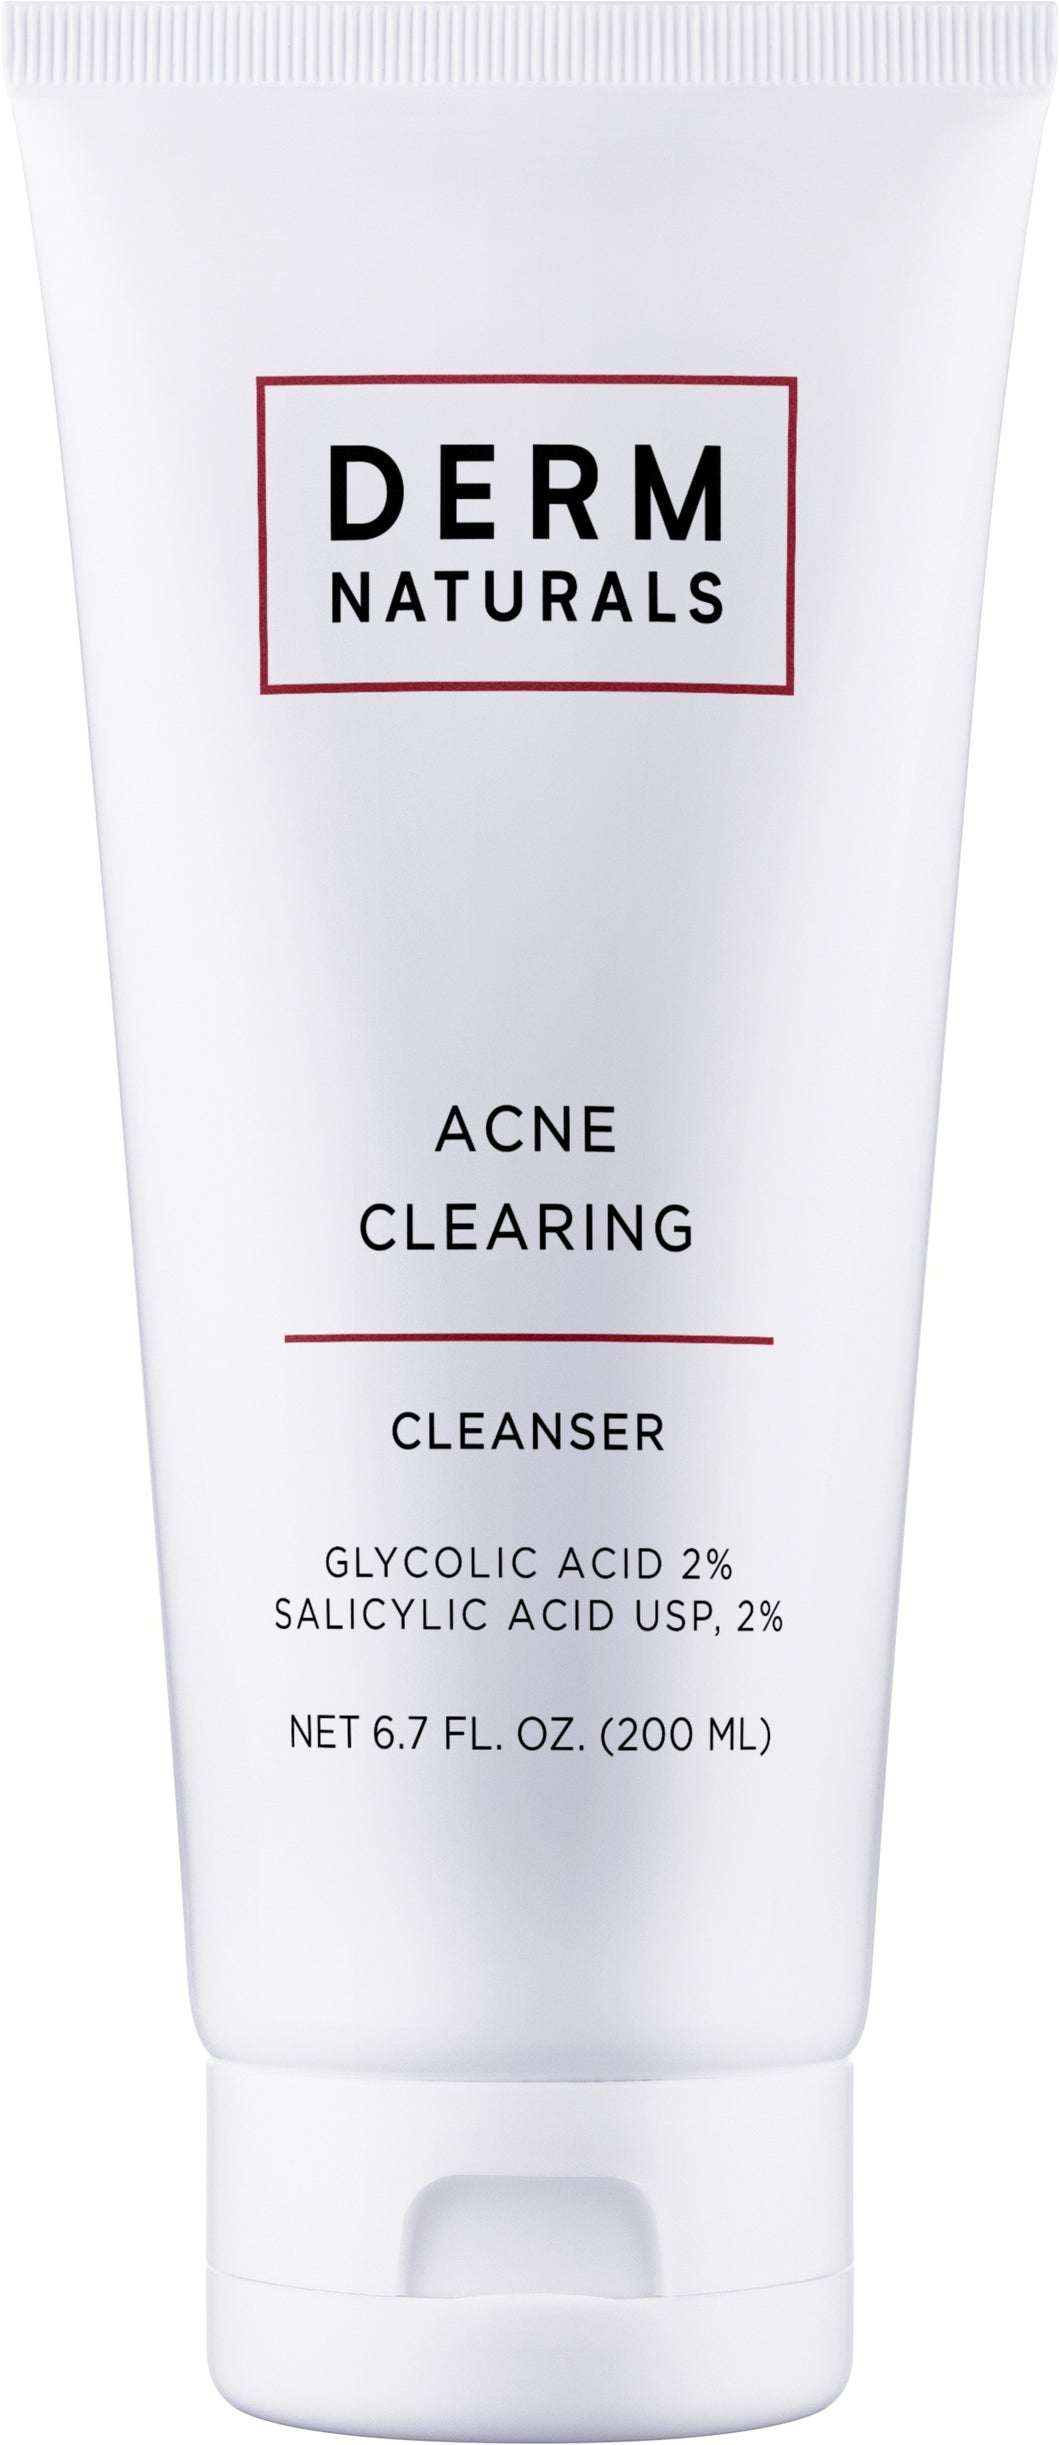 Derm Naturals Acne Clearing Cleanser with Gly/Sal 2/2